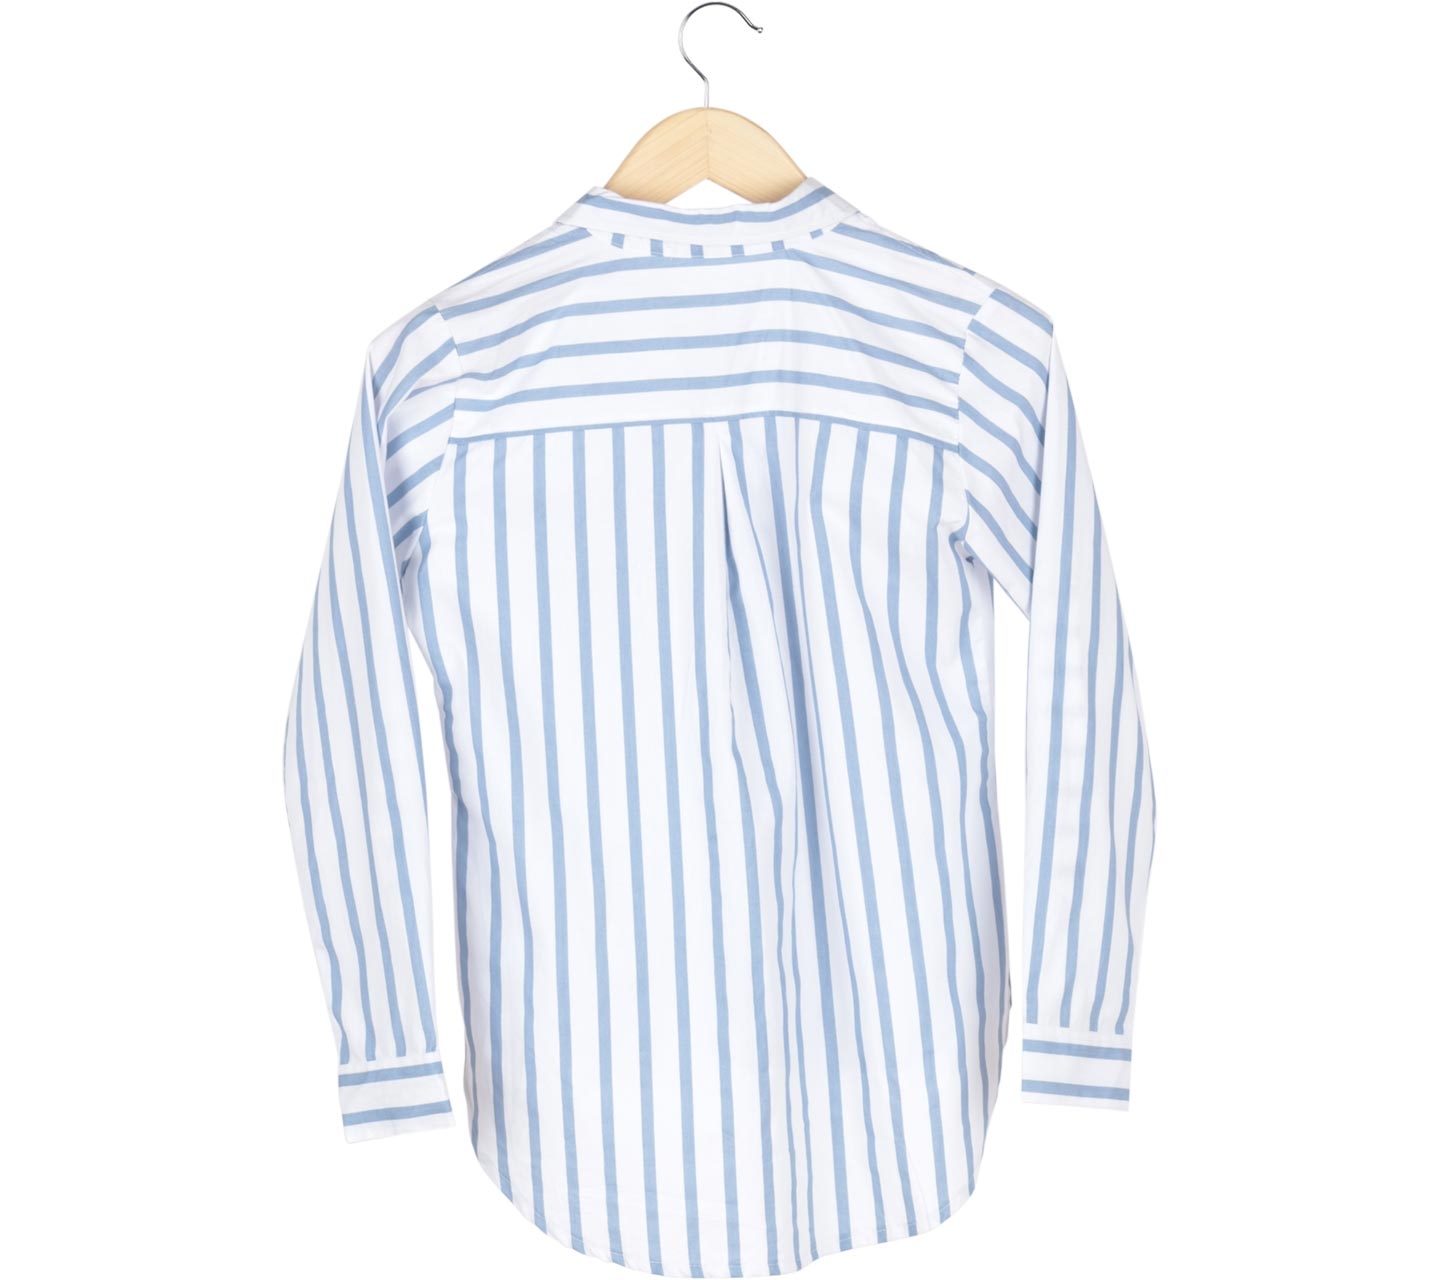 Tinkerlust White With Blue Stripes Shirt